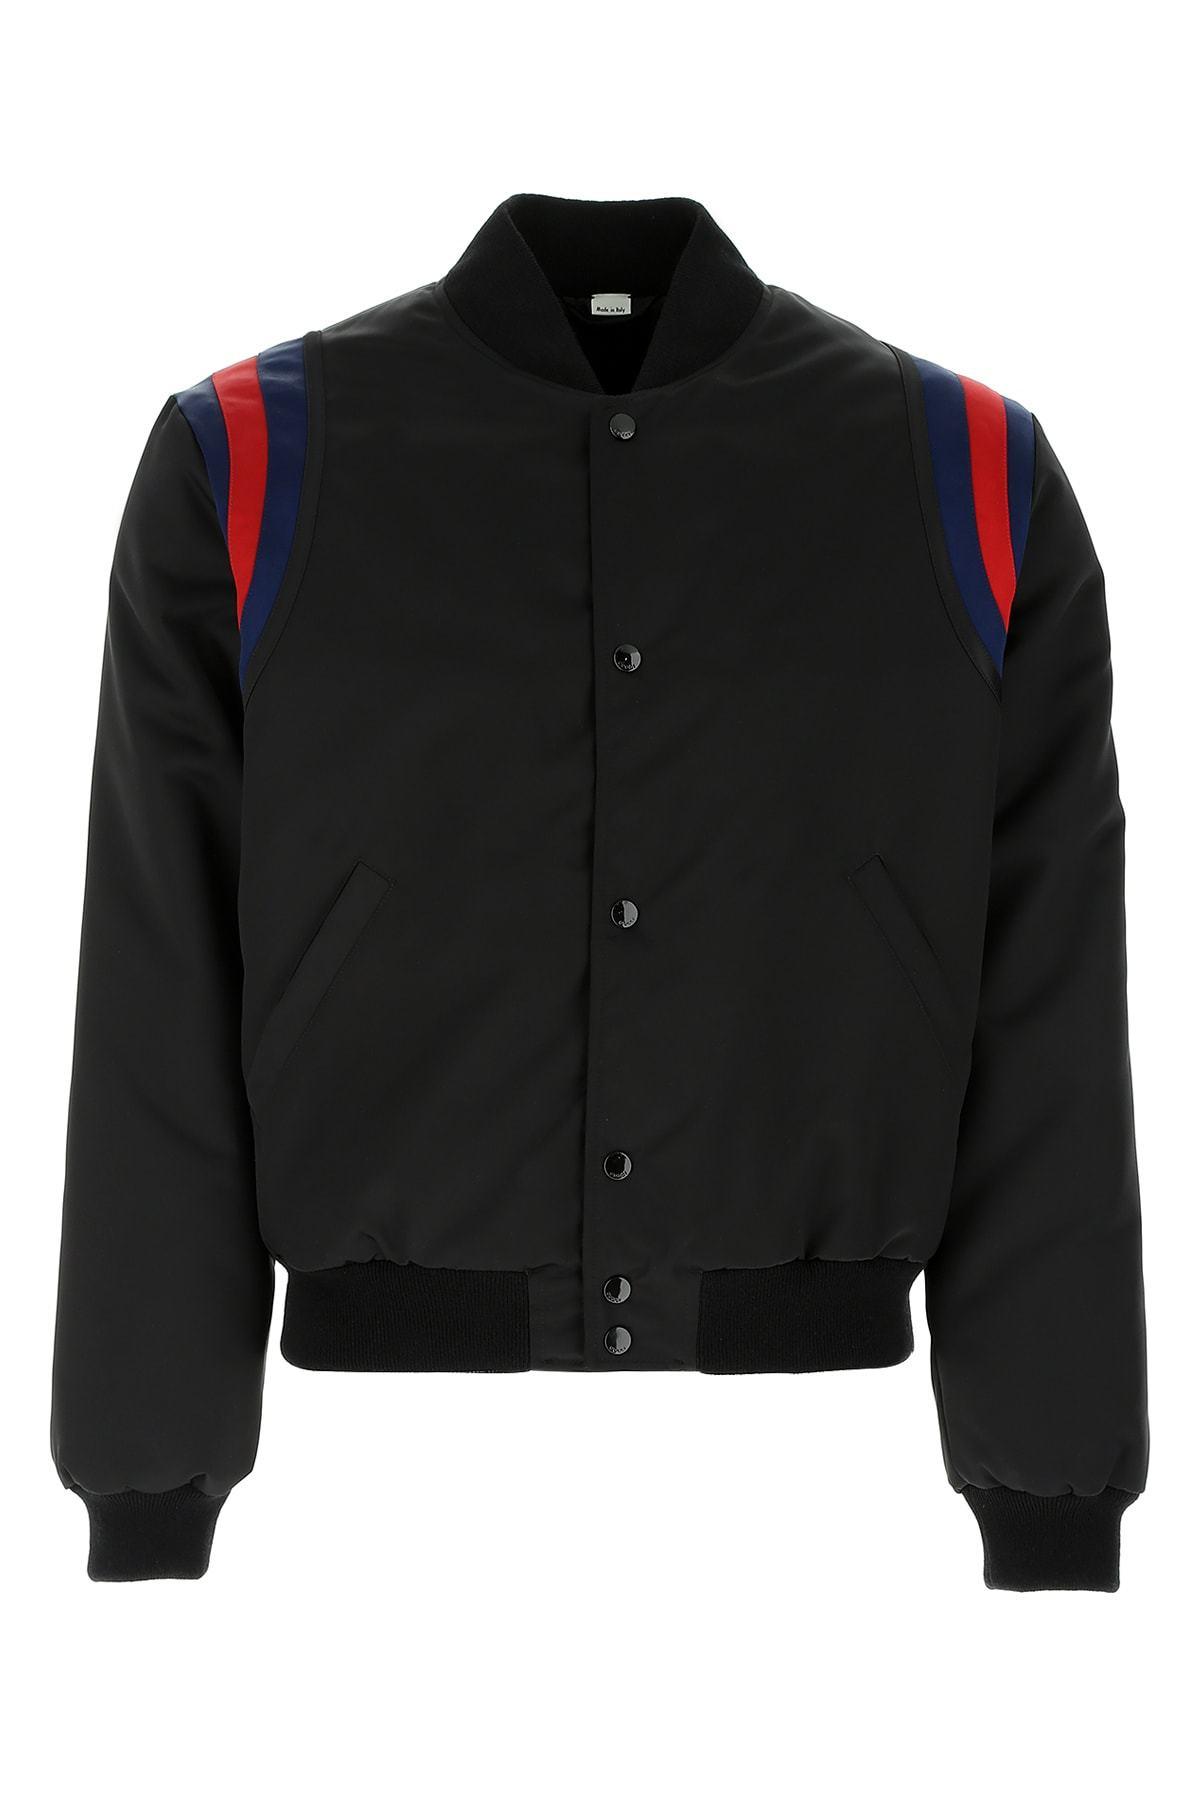 Gucci Synthetic Band Bomber Jacket in Black for Men - Save 35% - Lyst